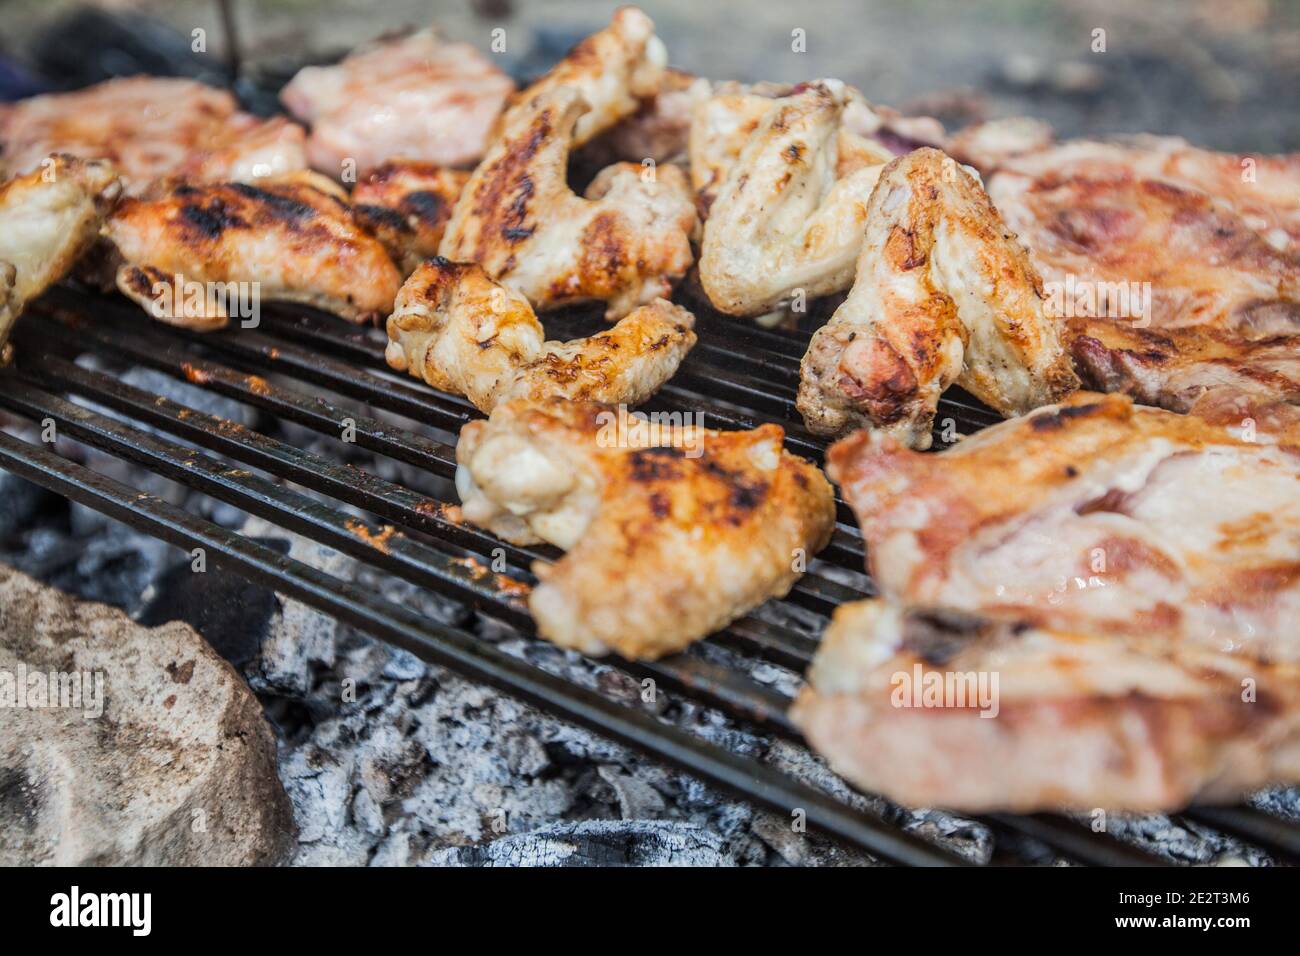 Grilled Meat , summer picnic , cooking food outdoor Stock Photo